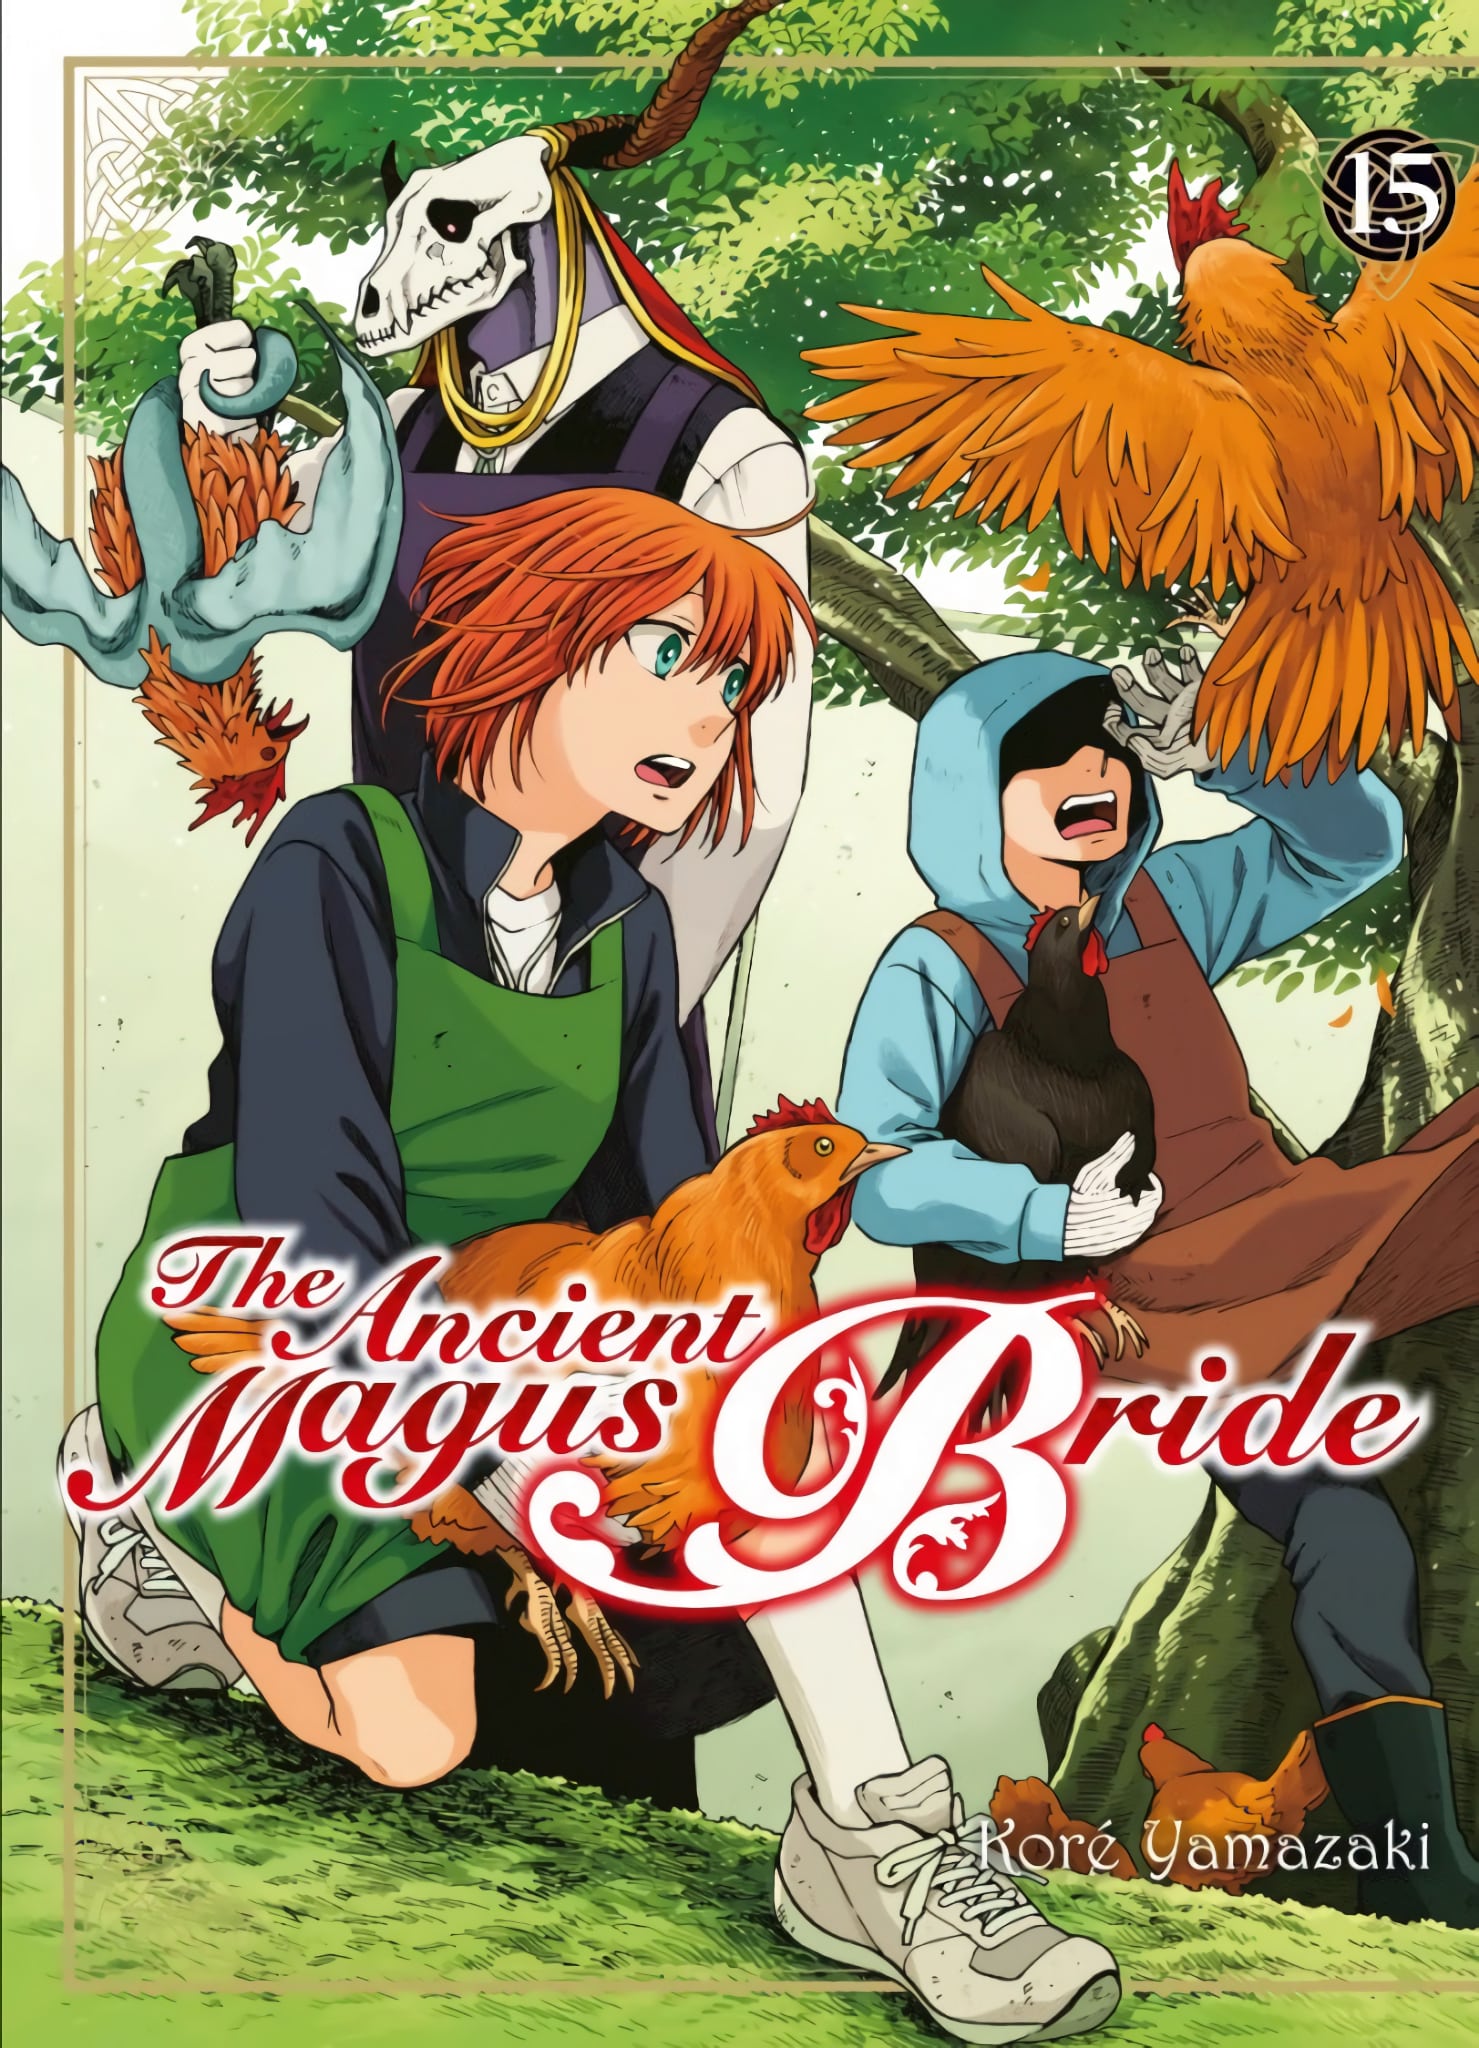 Tome 15 du manga The Ancient Magus Bride